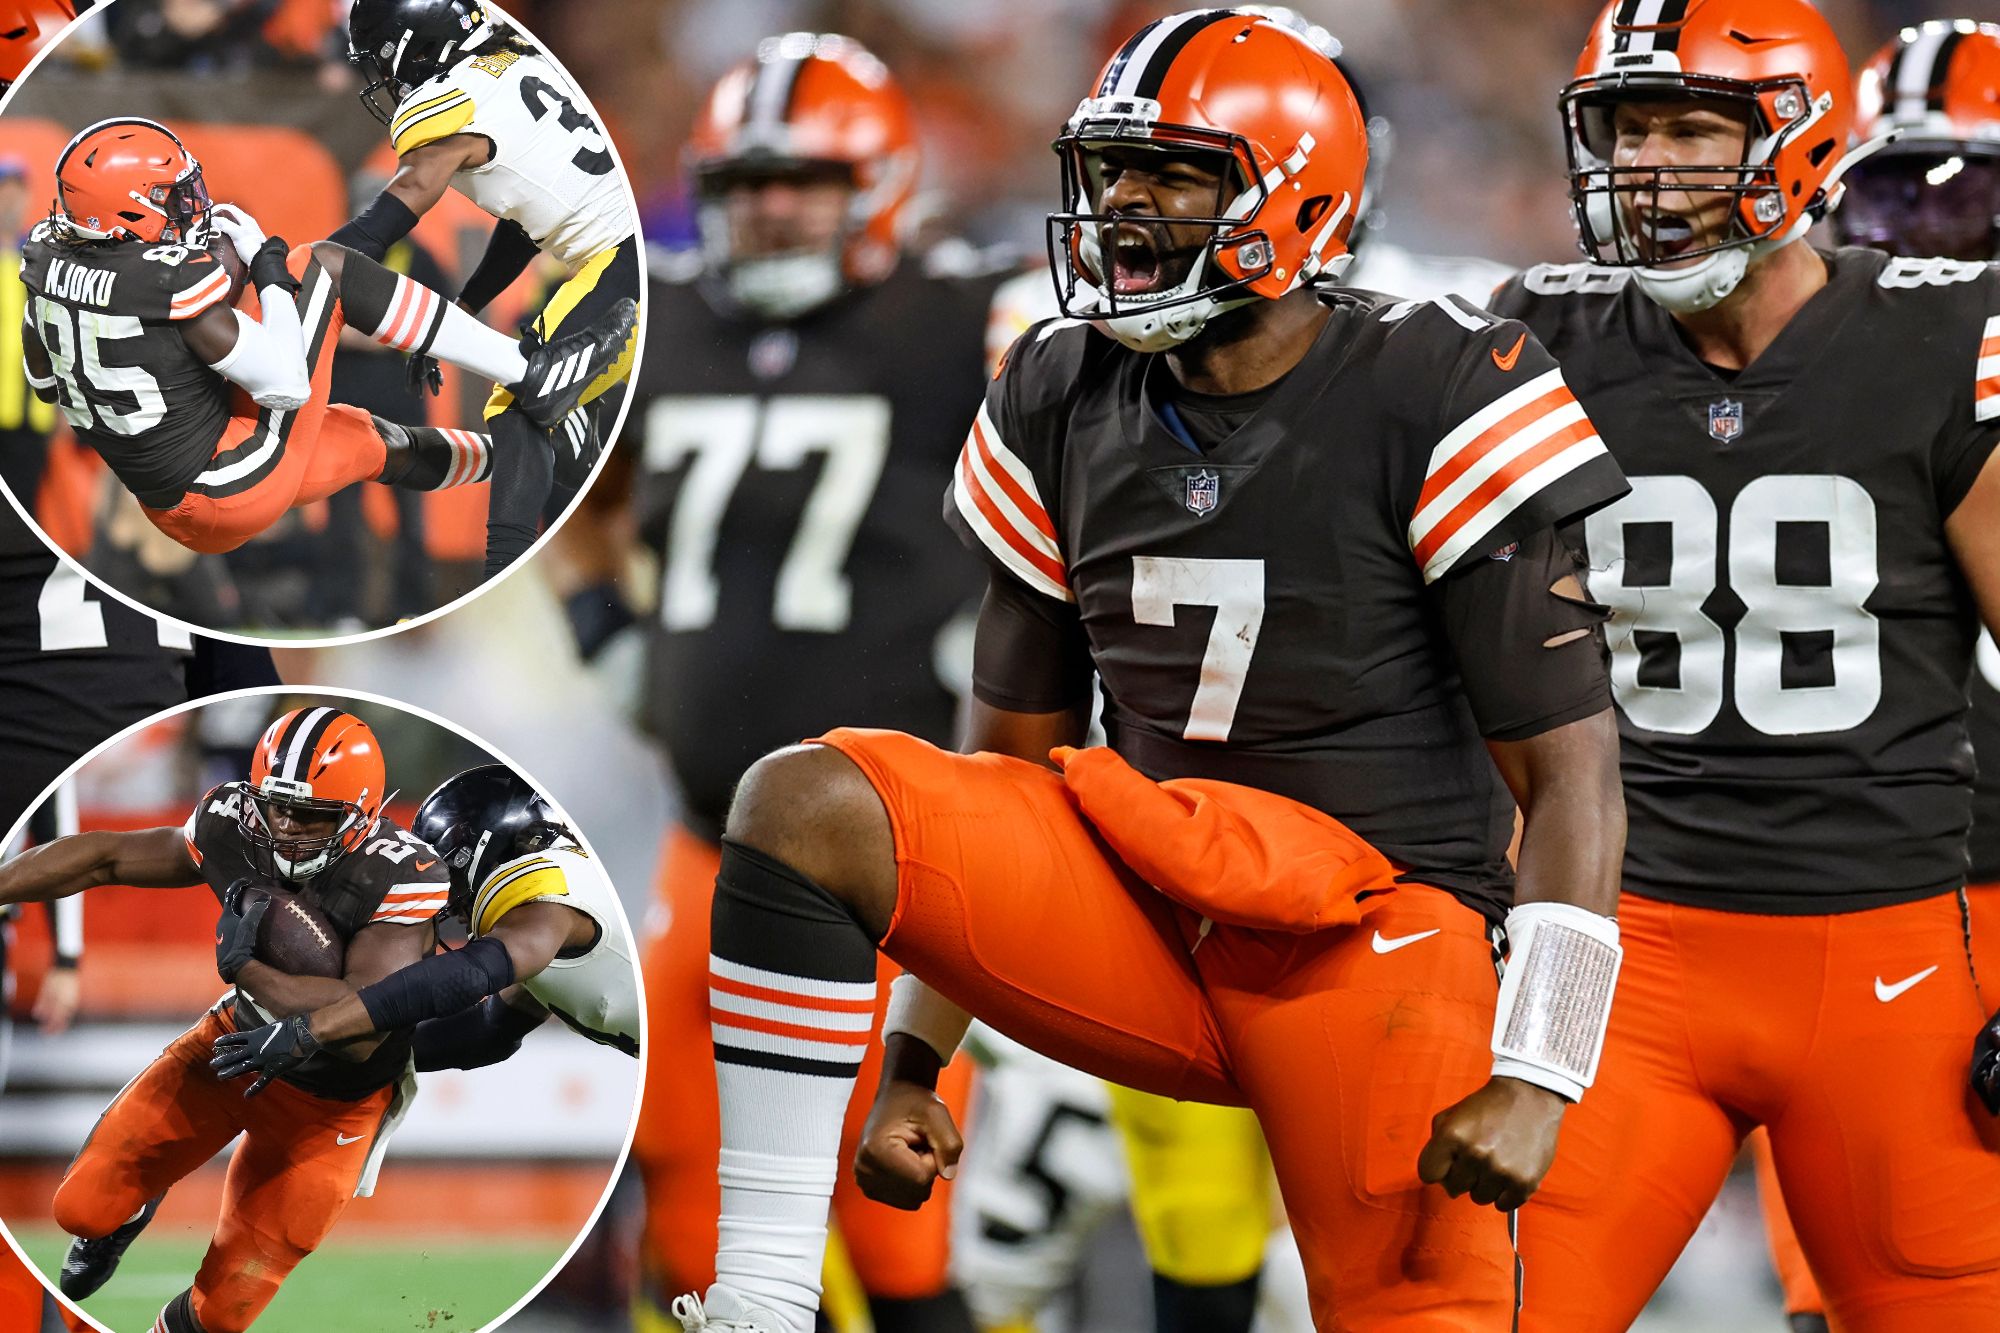 Brissett leads the Browns' comeback victory over the Steelers, 29-17